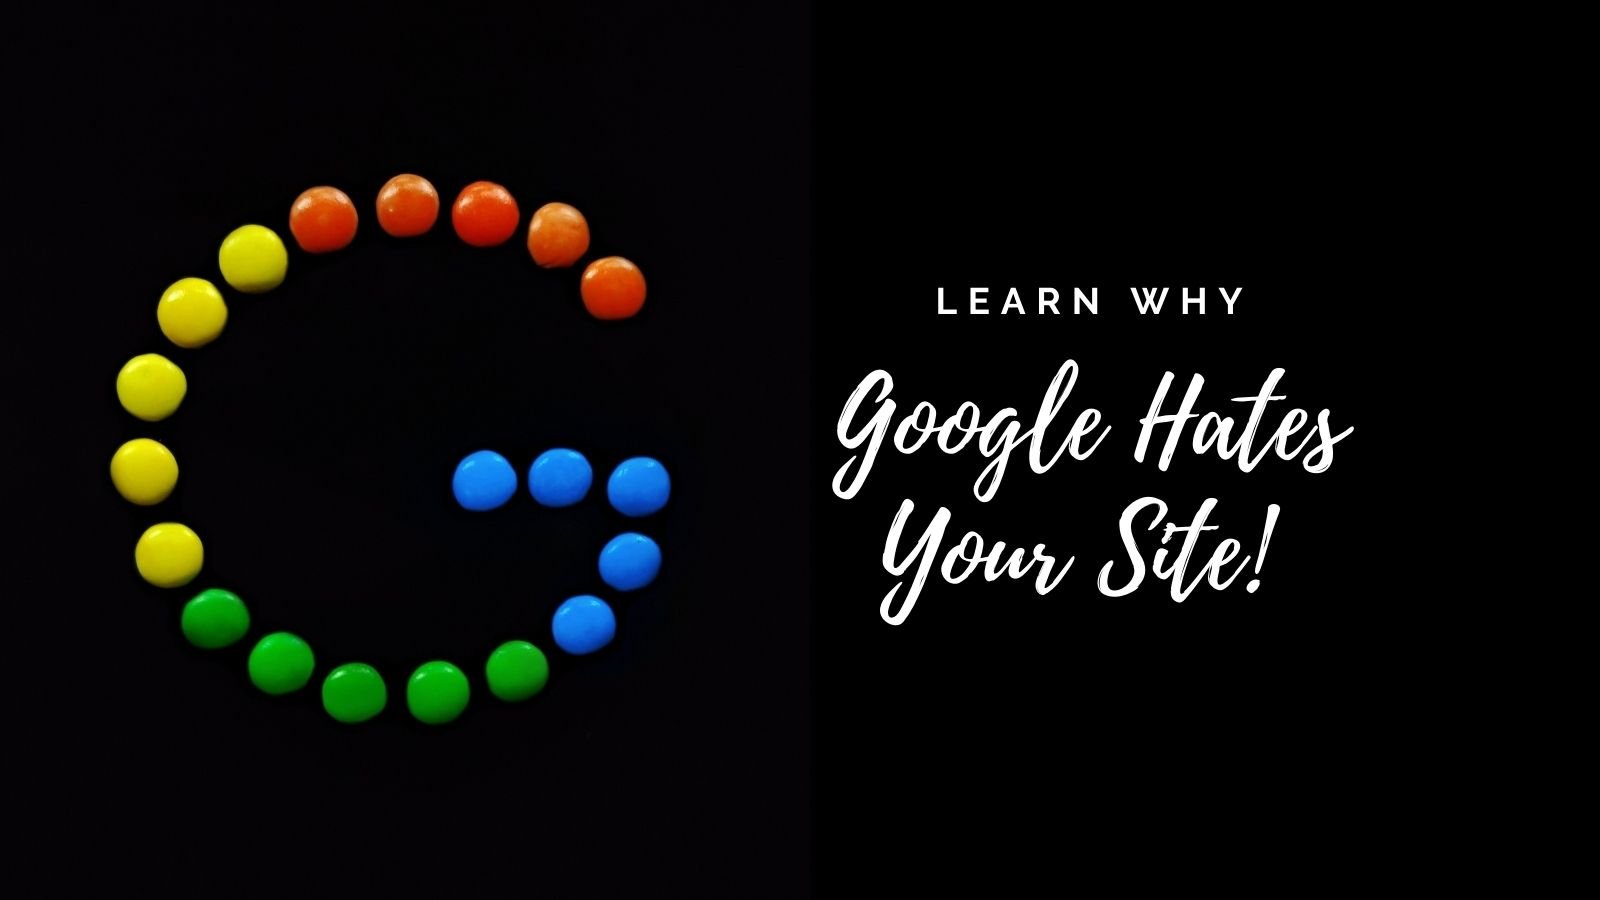 Why Google hates your site